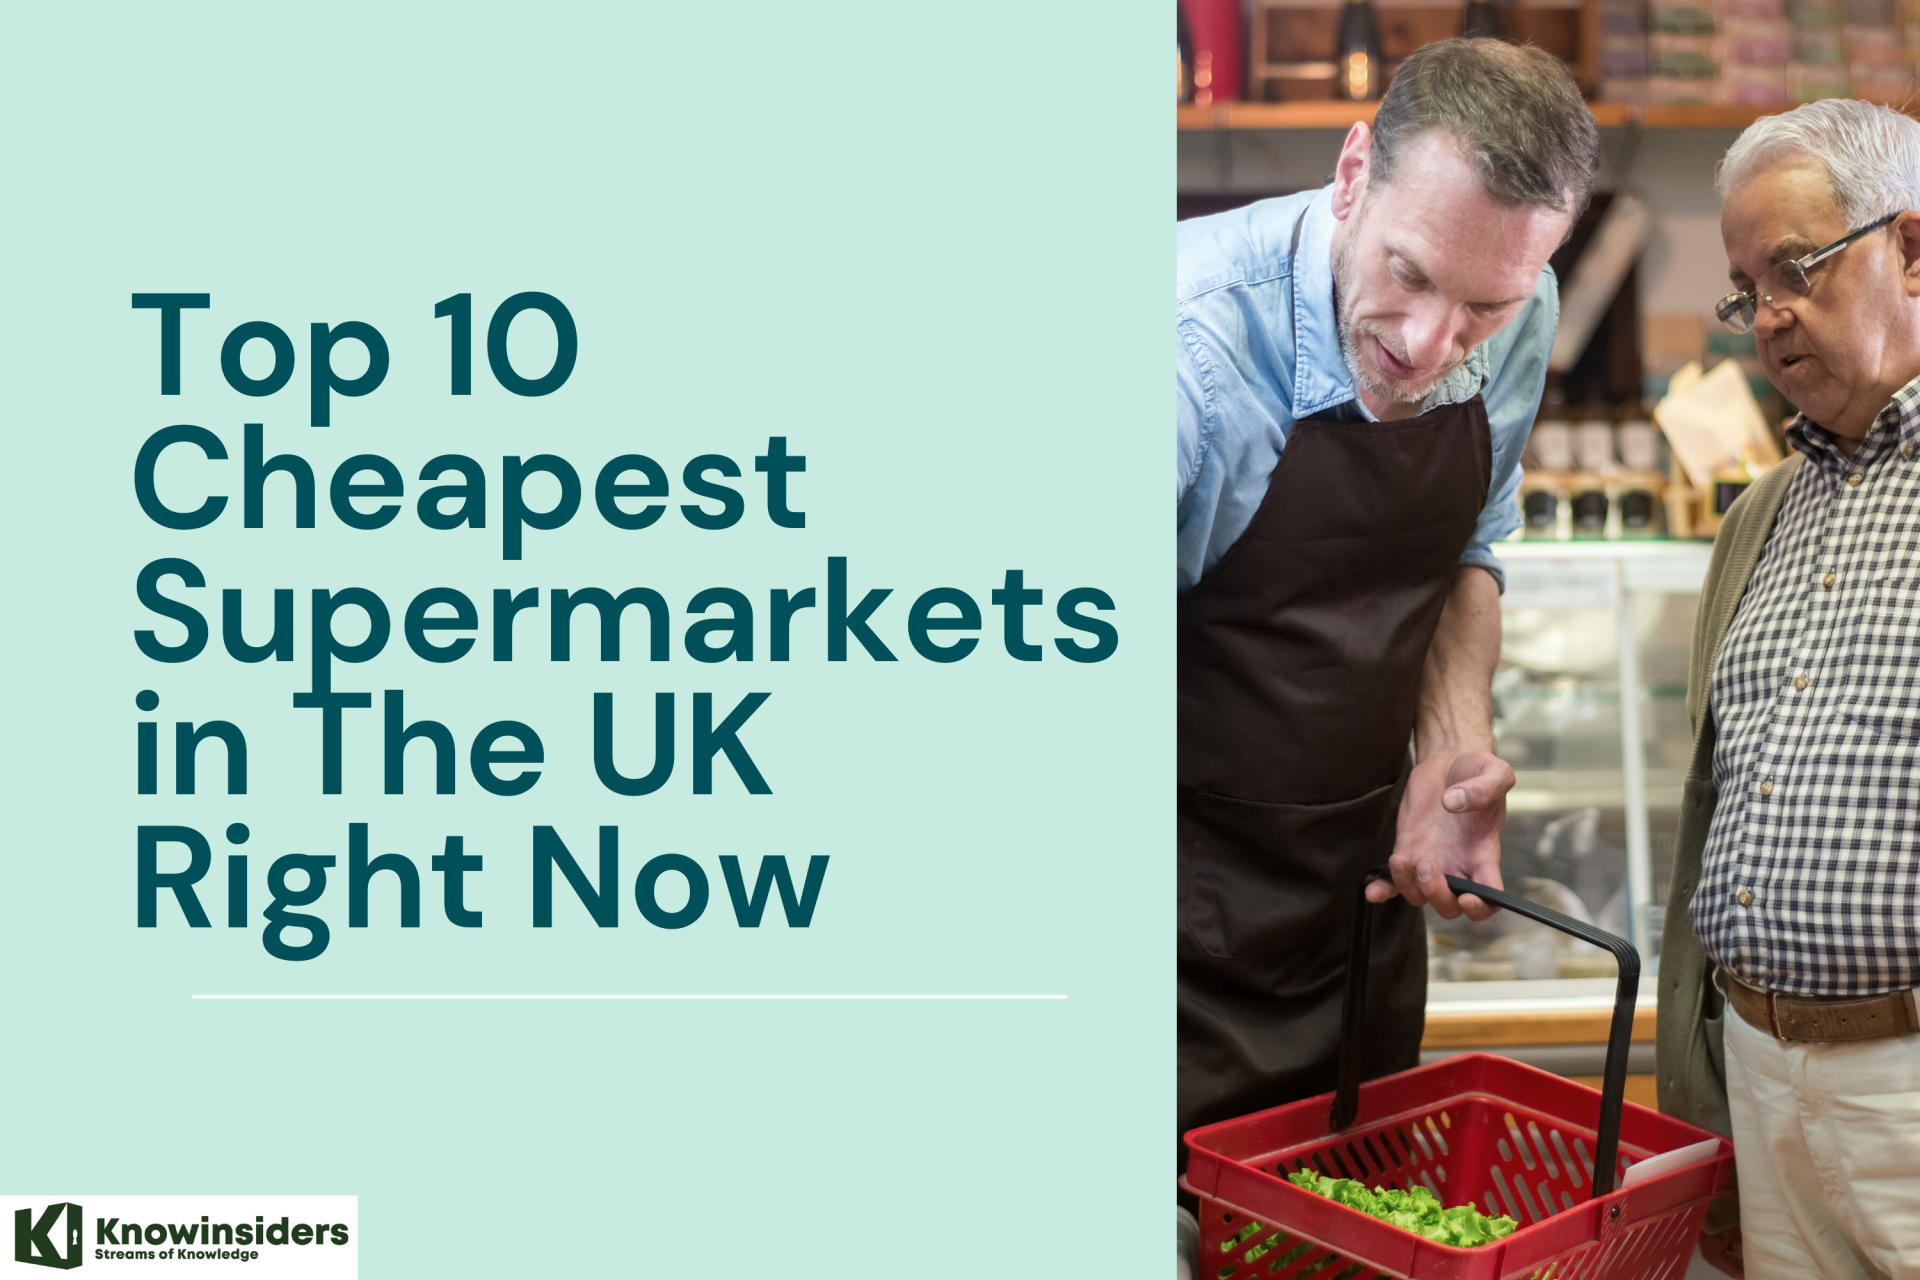 Top 10 Cheapest Supermarkets in The UK Right Now